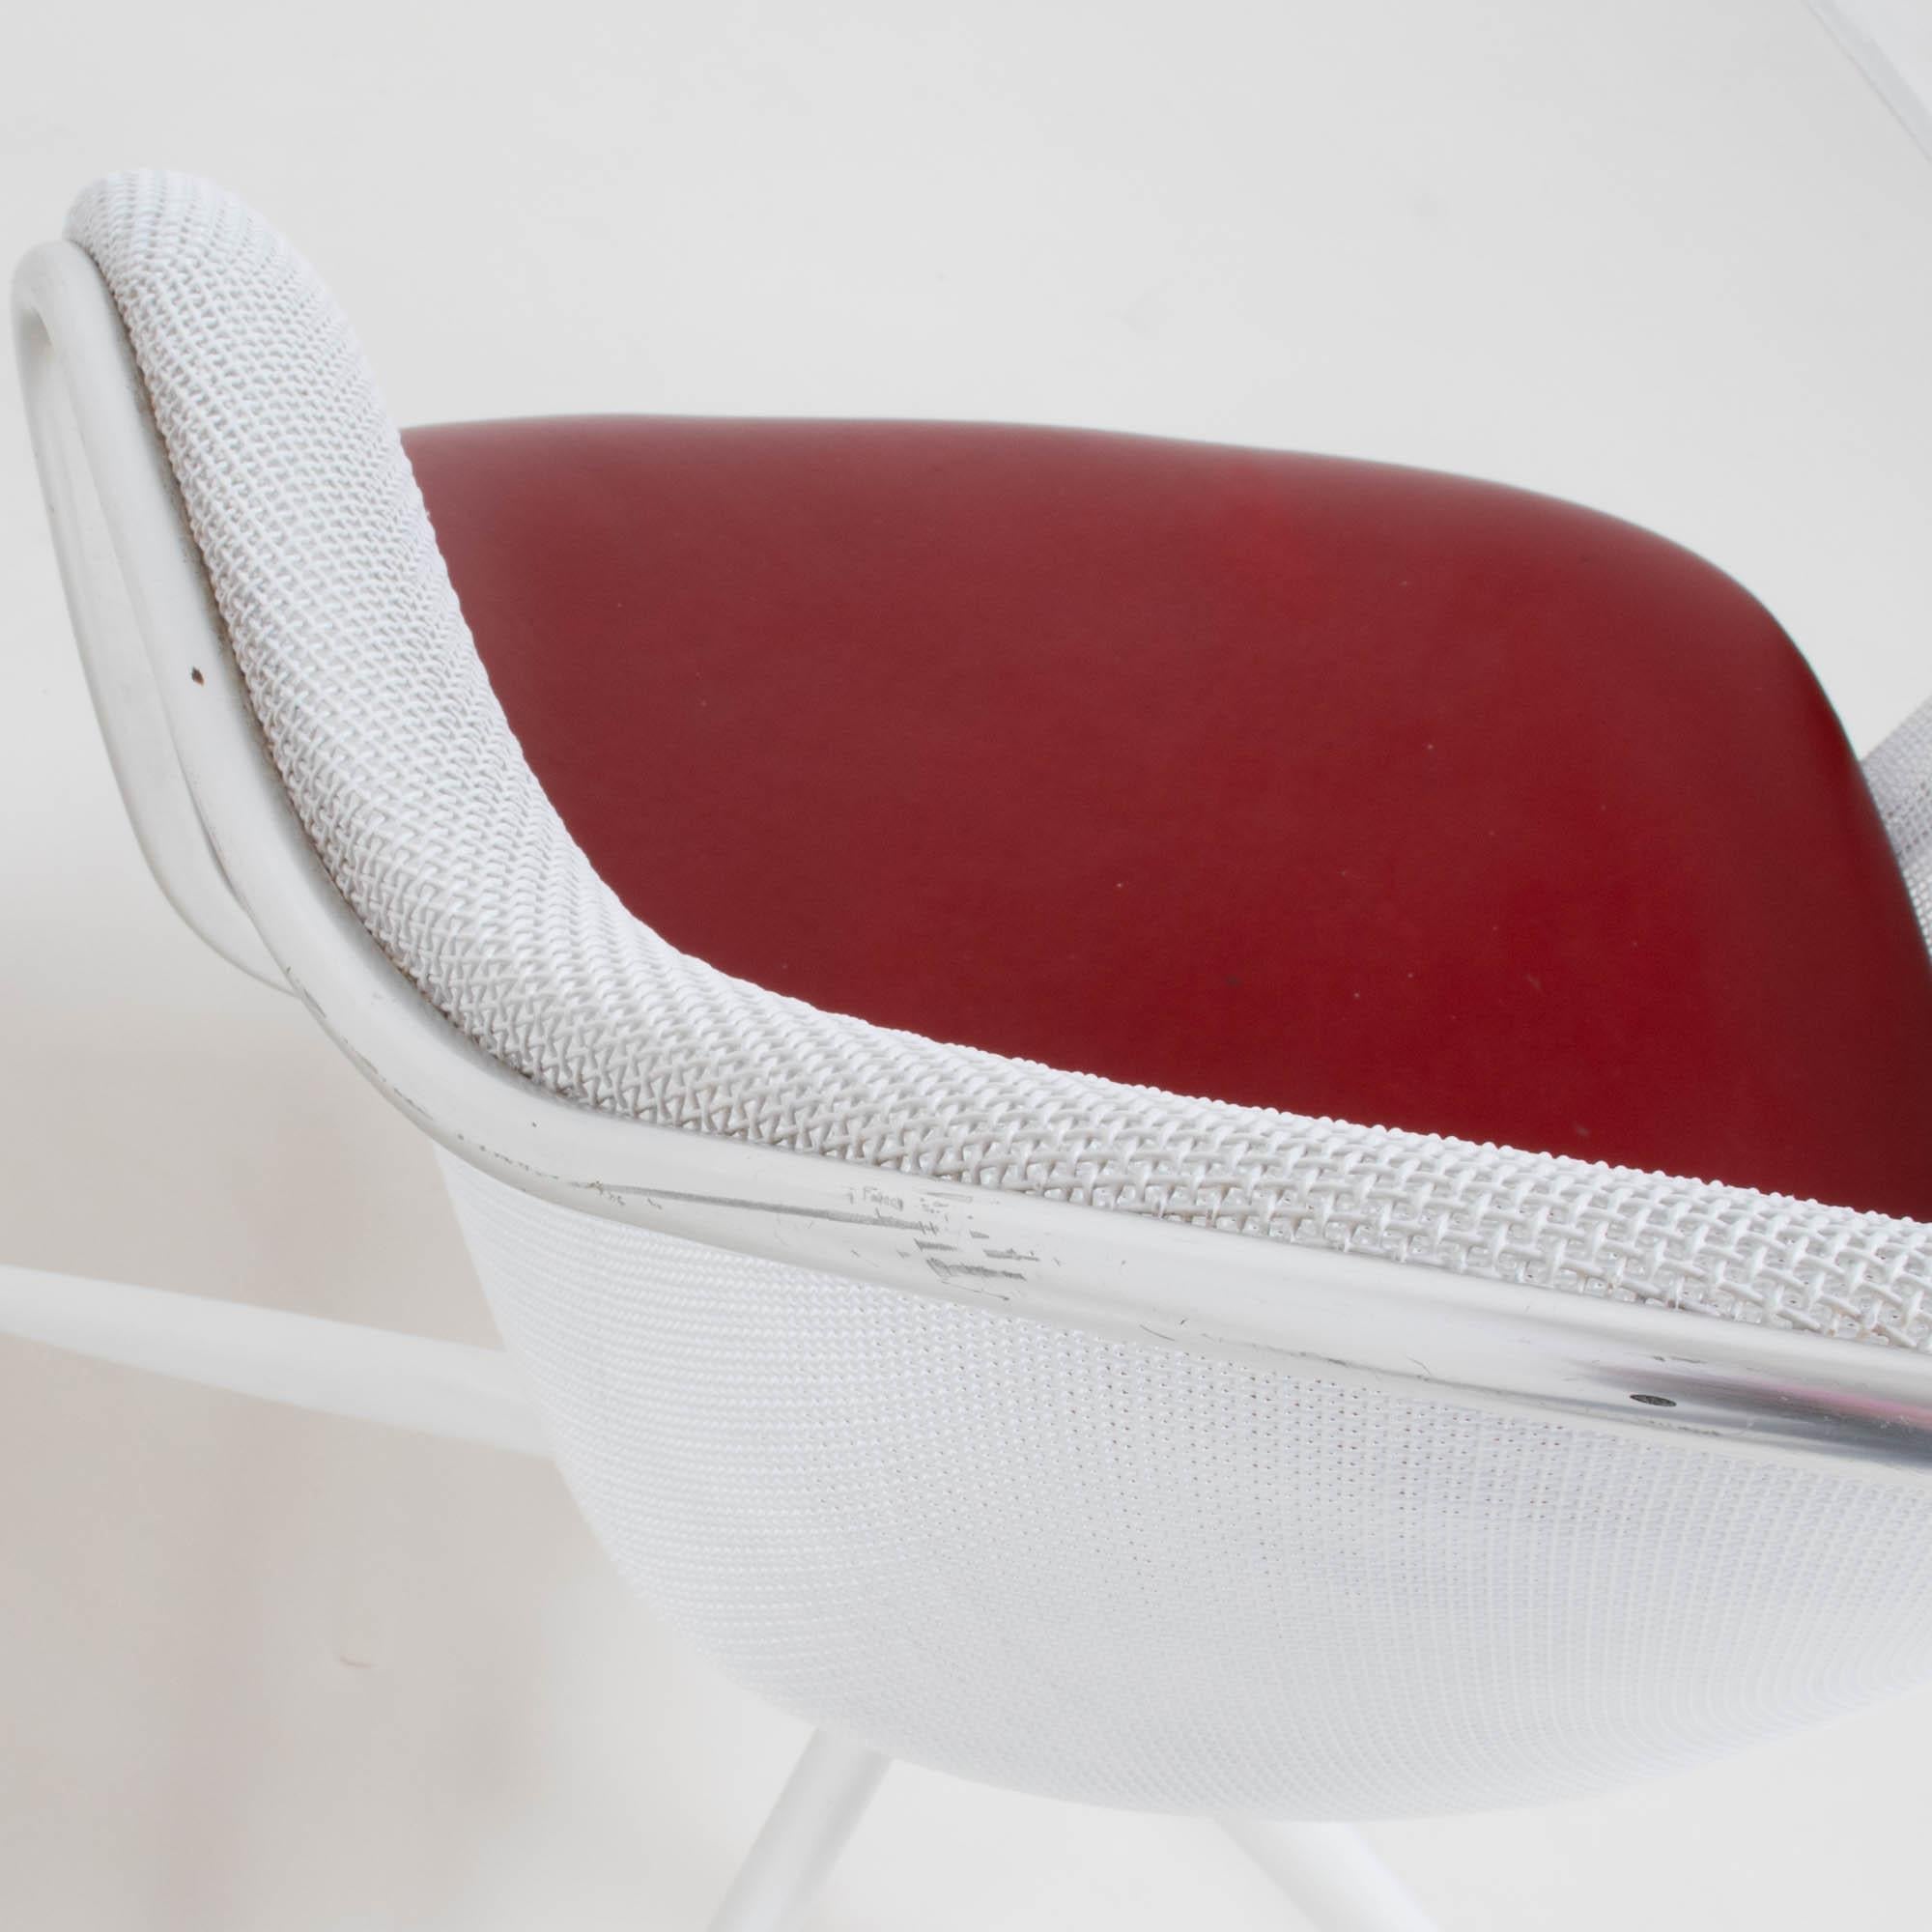 B&B Italia by Antonio Citterio, Luta White and Red Leather Swivel Dining Chairs 4